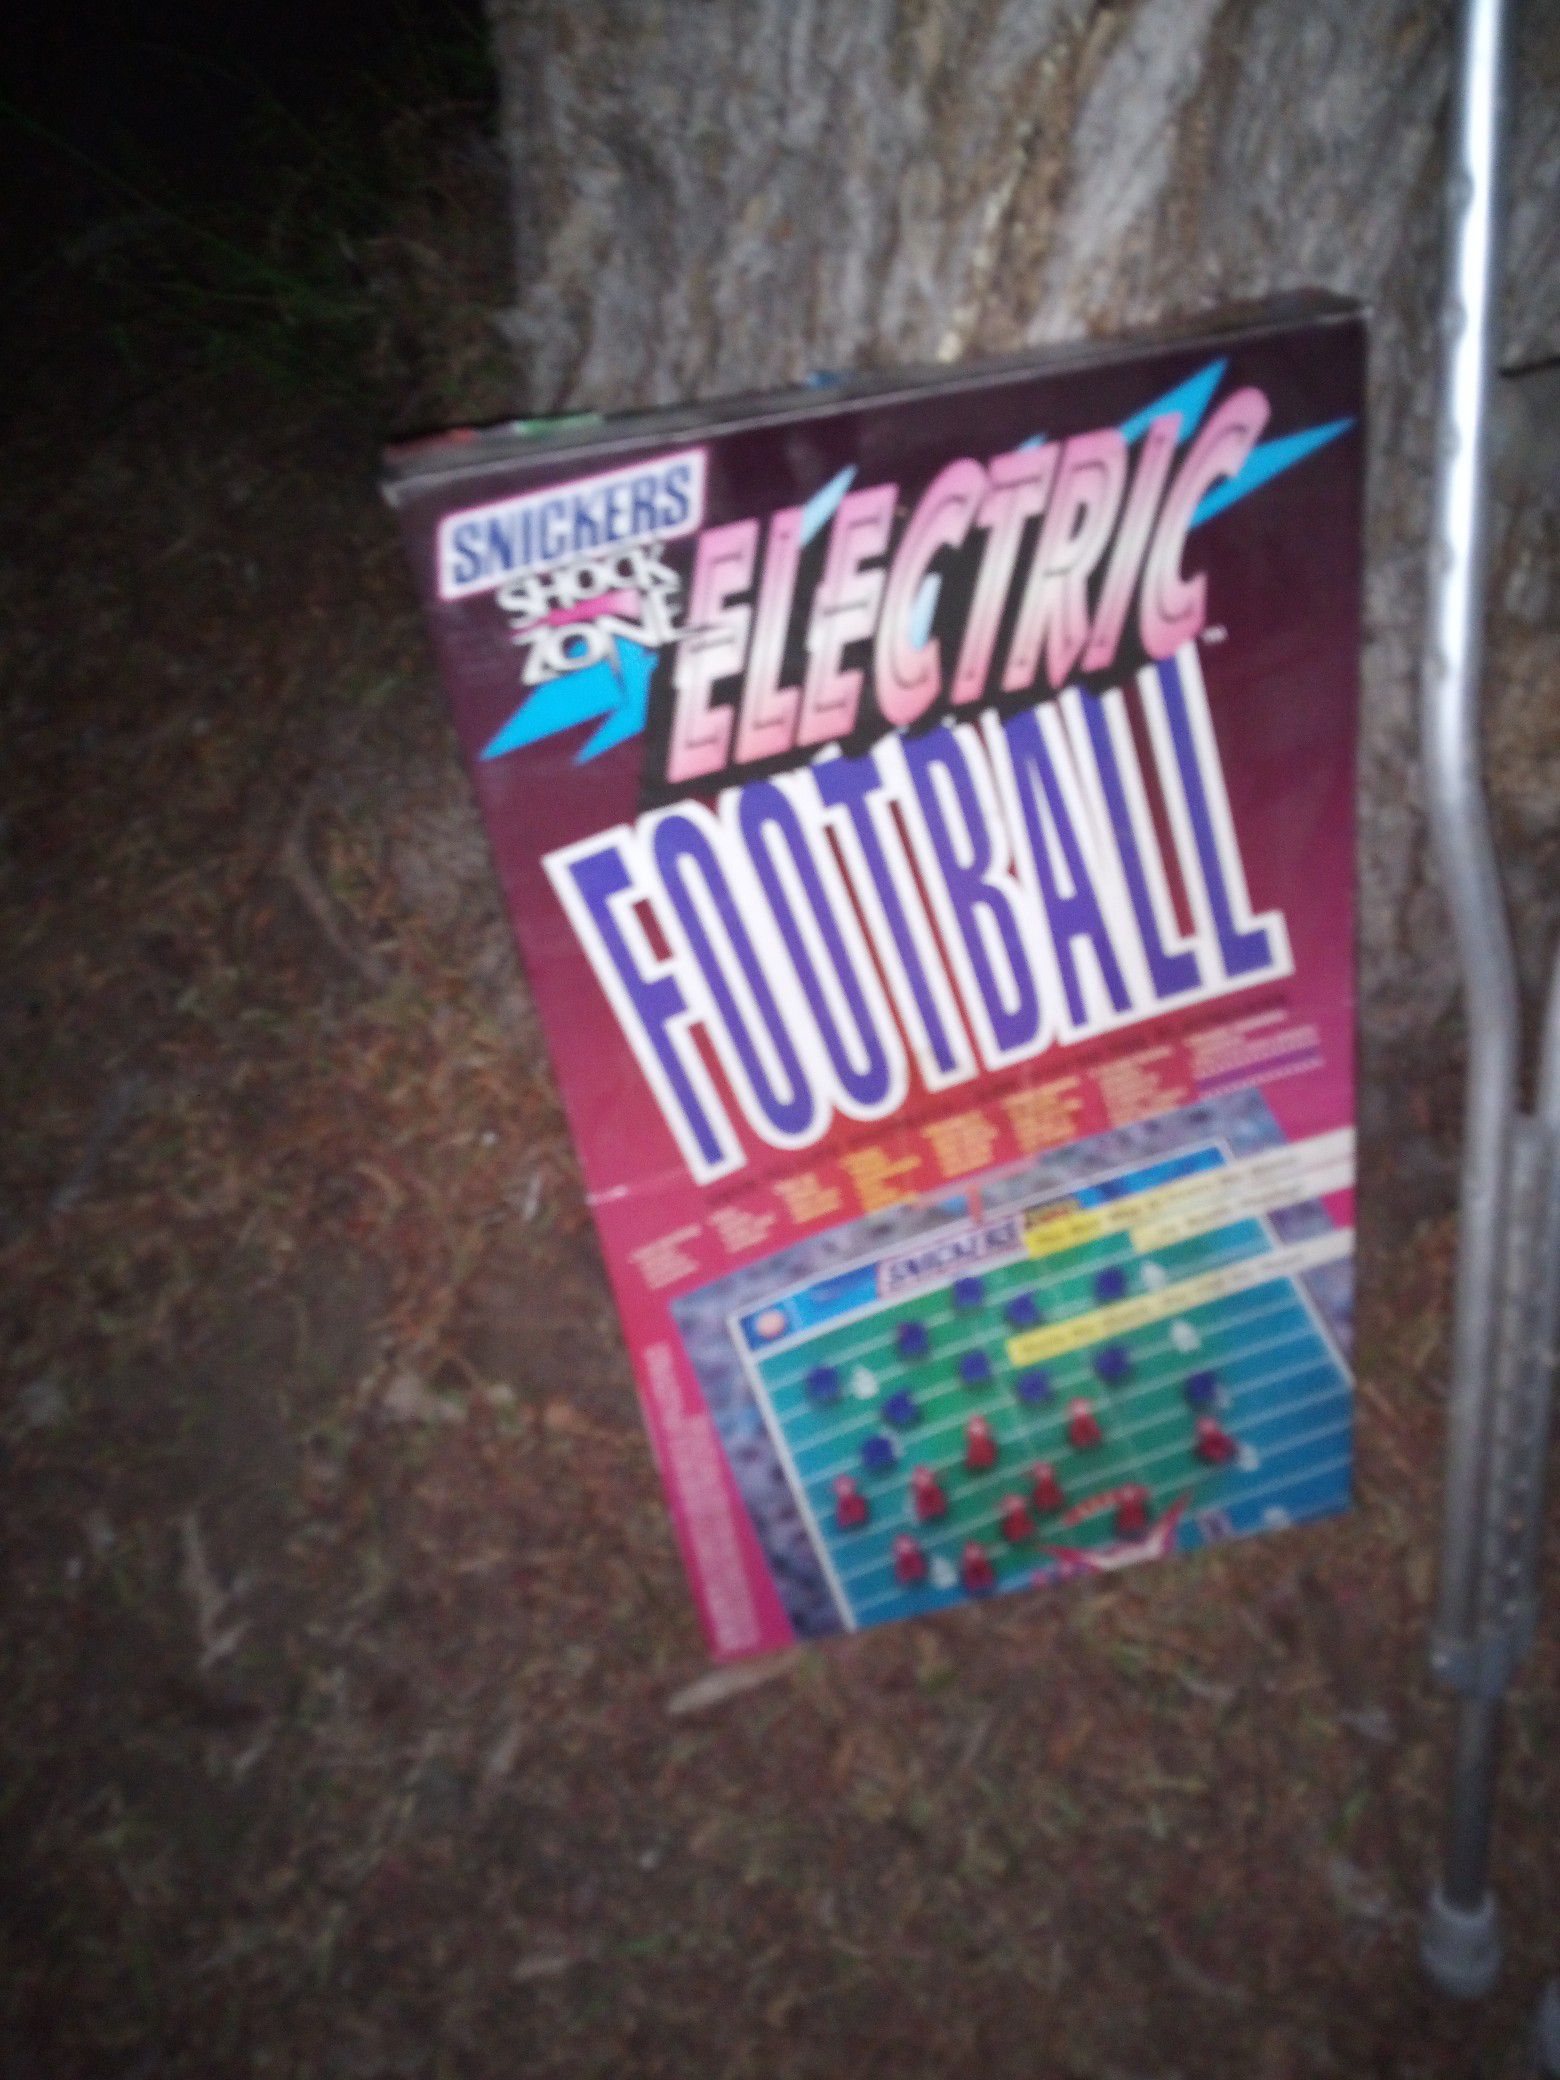 Electric football from 90s